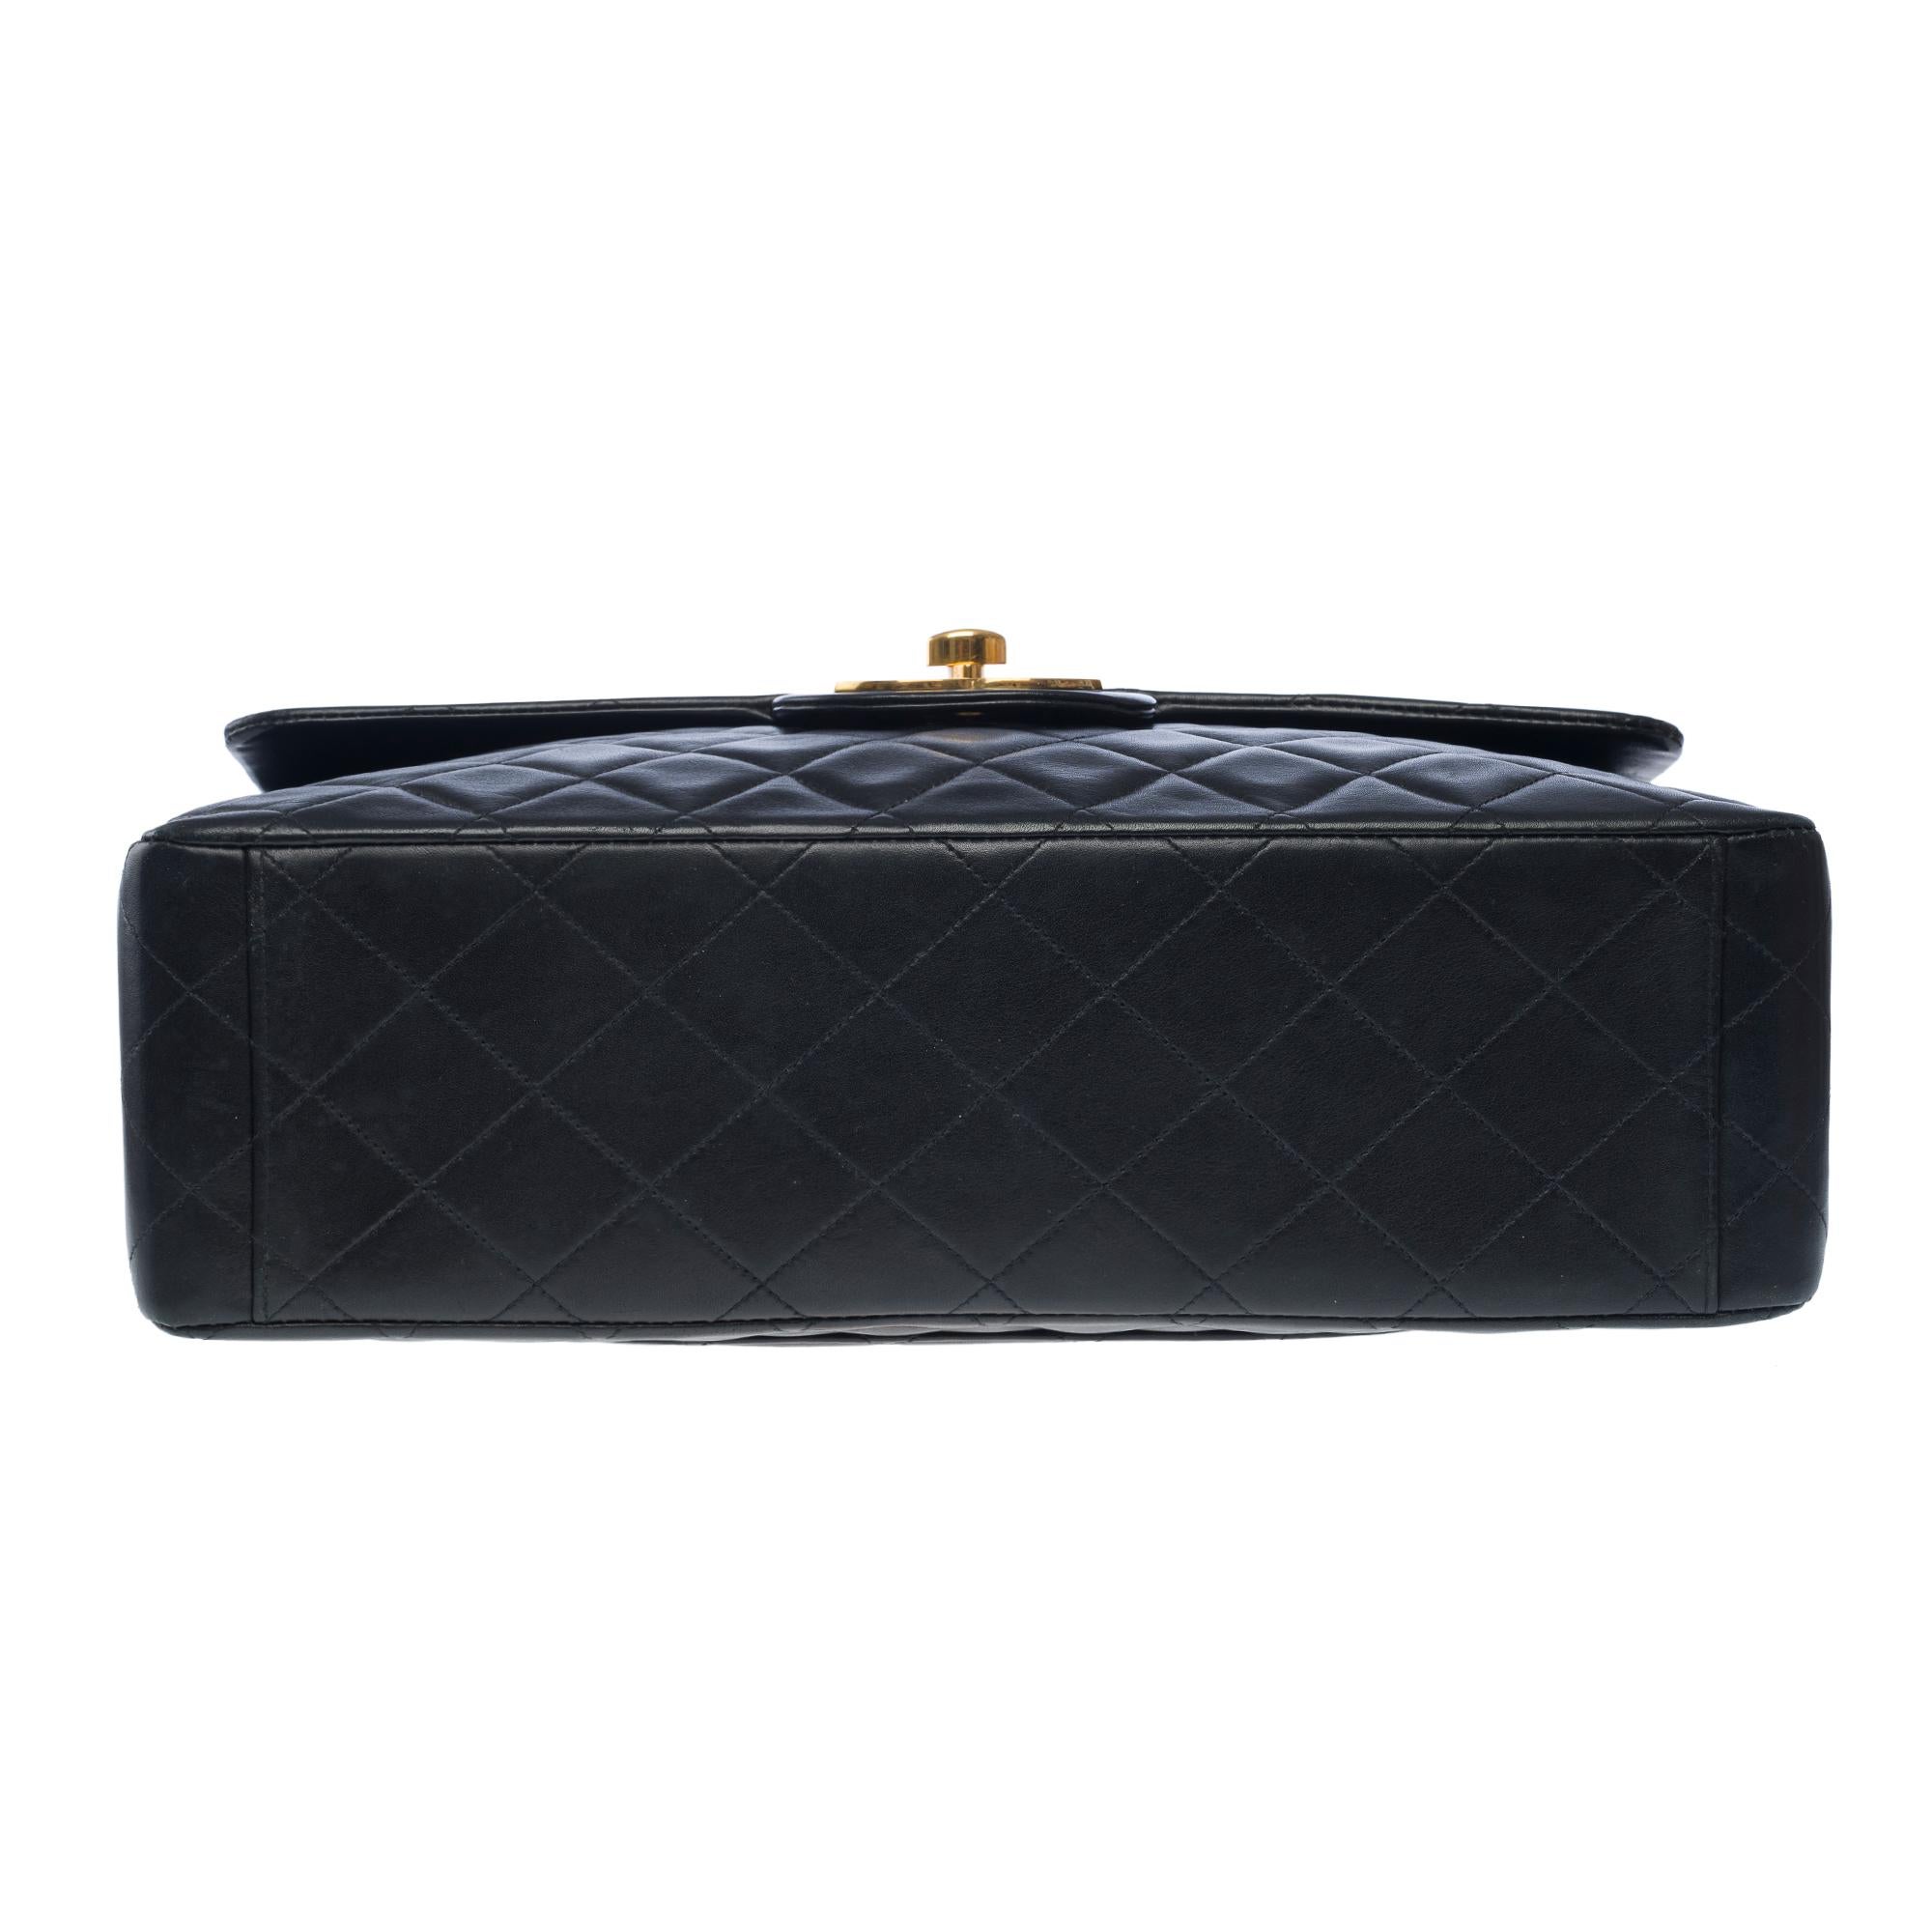 Chanel Timeless Maxi Jumbo flap shoulder bag in black quilted lambskin, GHW For Sale 5